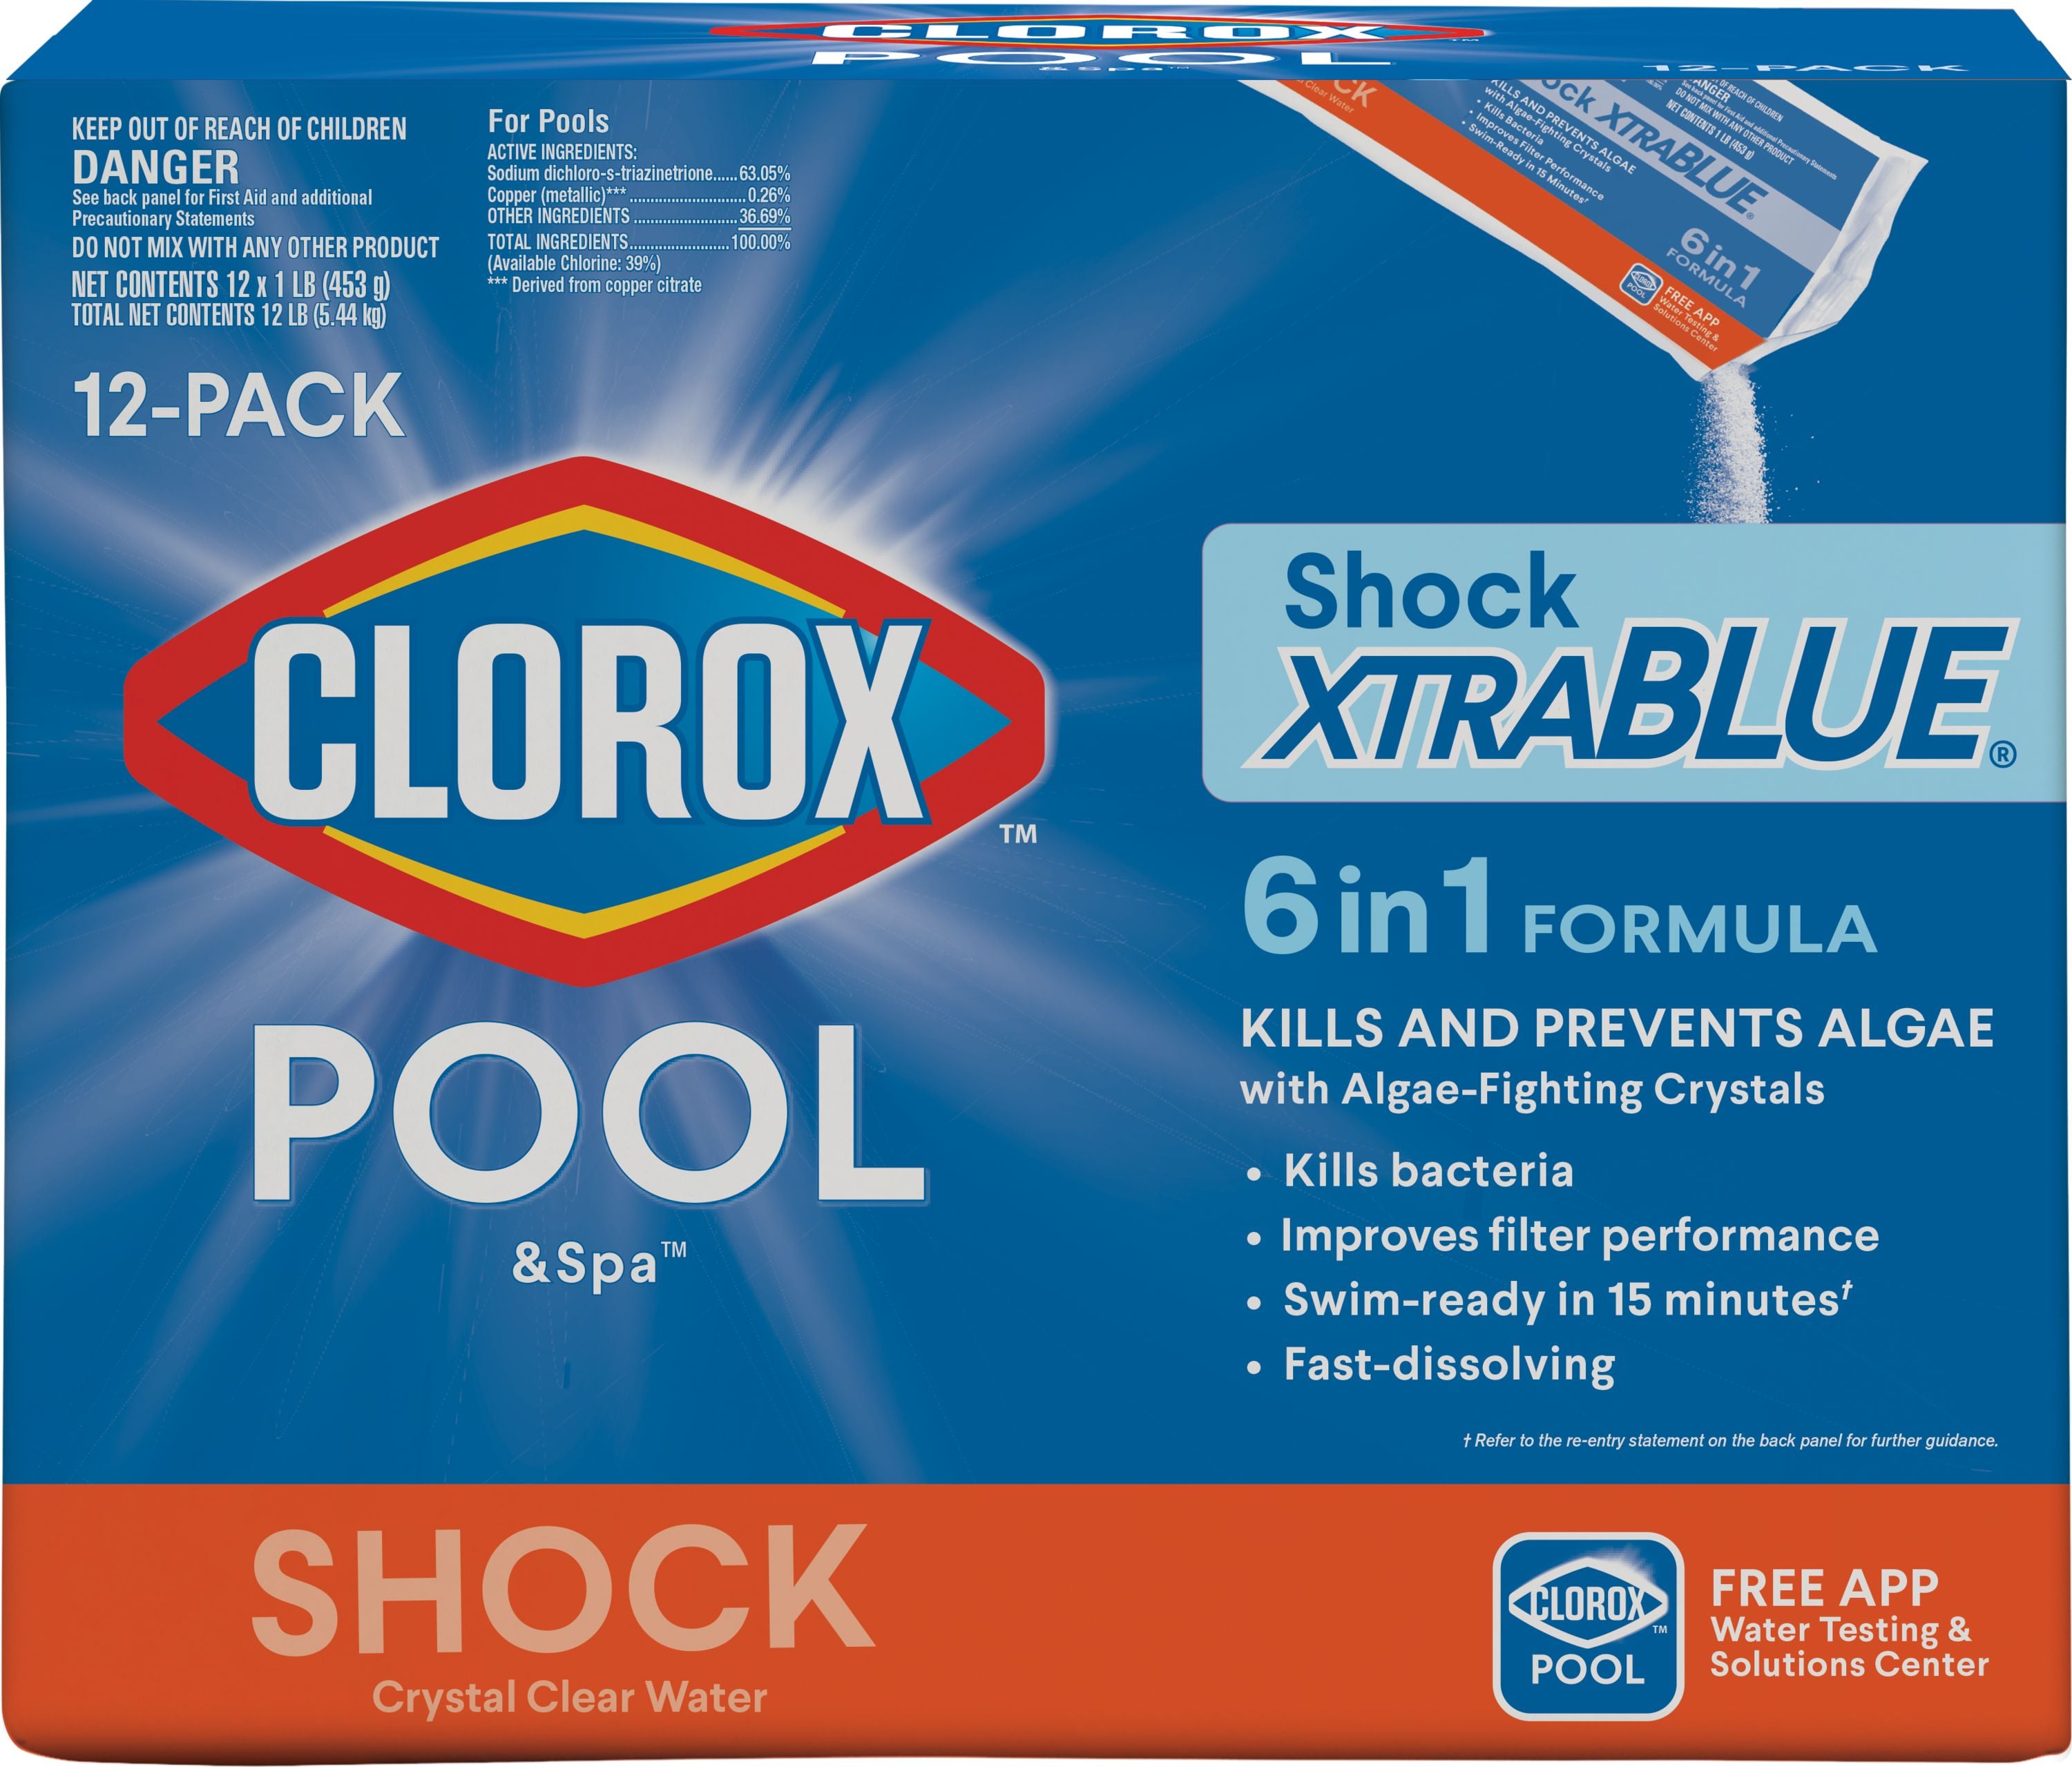 1 Pk of 6 in 1 Clorox Pool and Spa XTRA Blue Shock with Algae Killing Crystals 